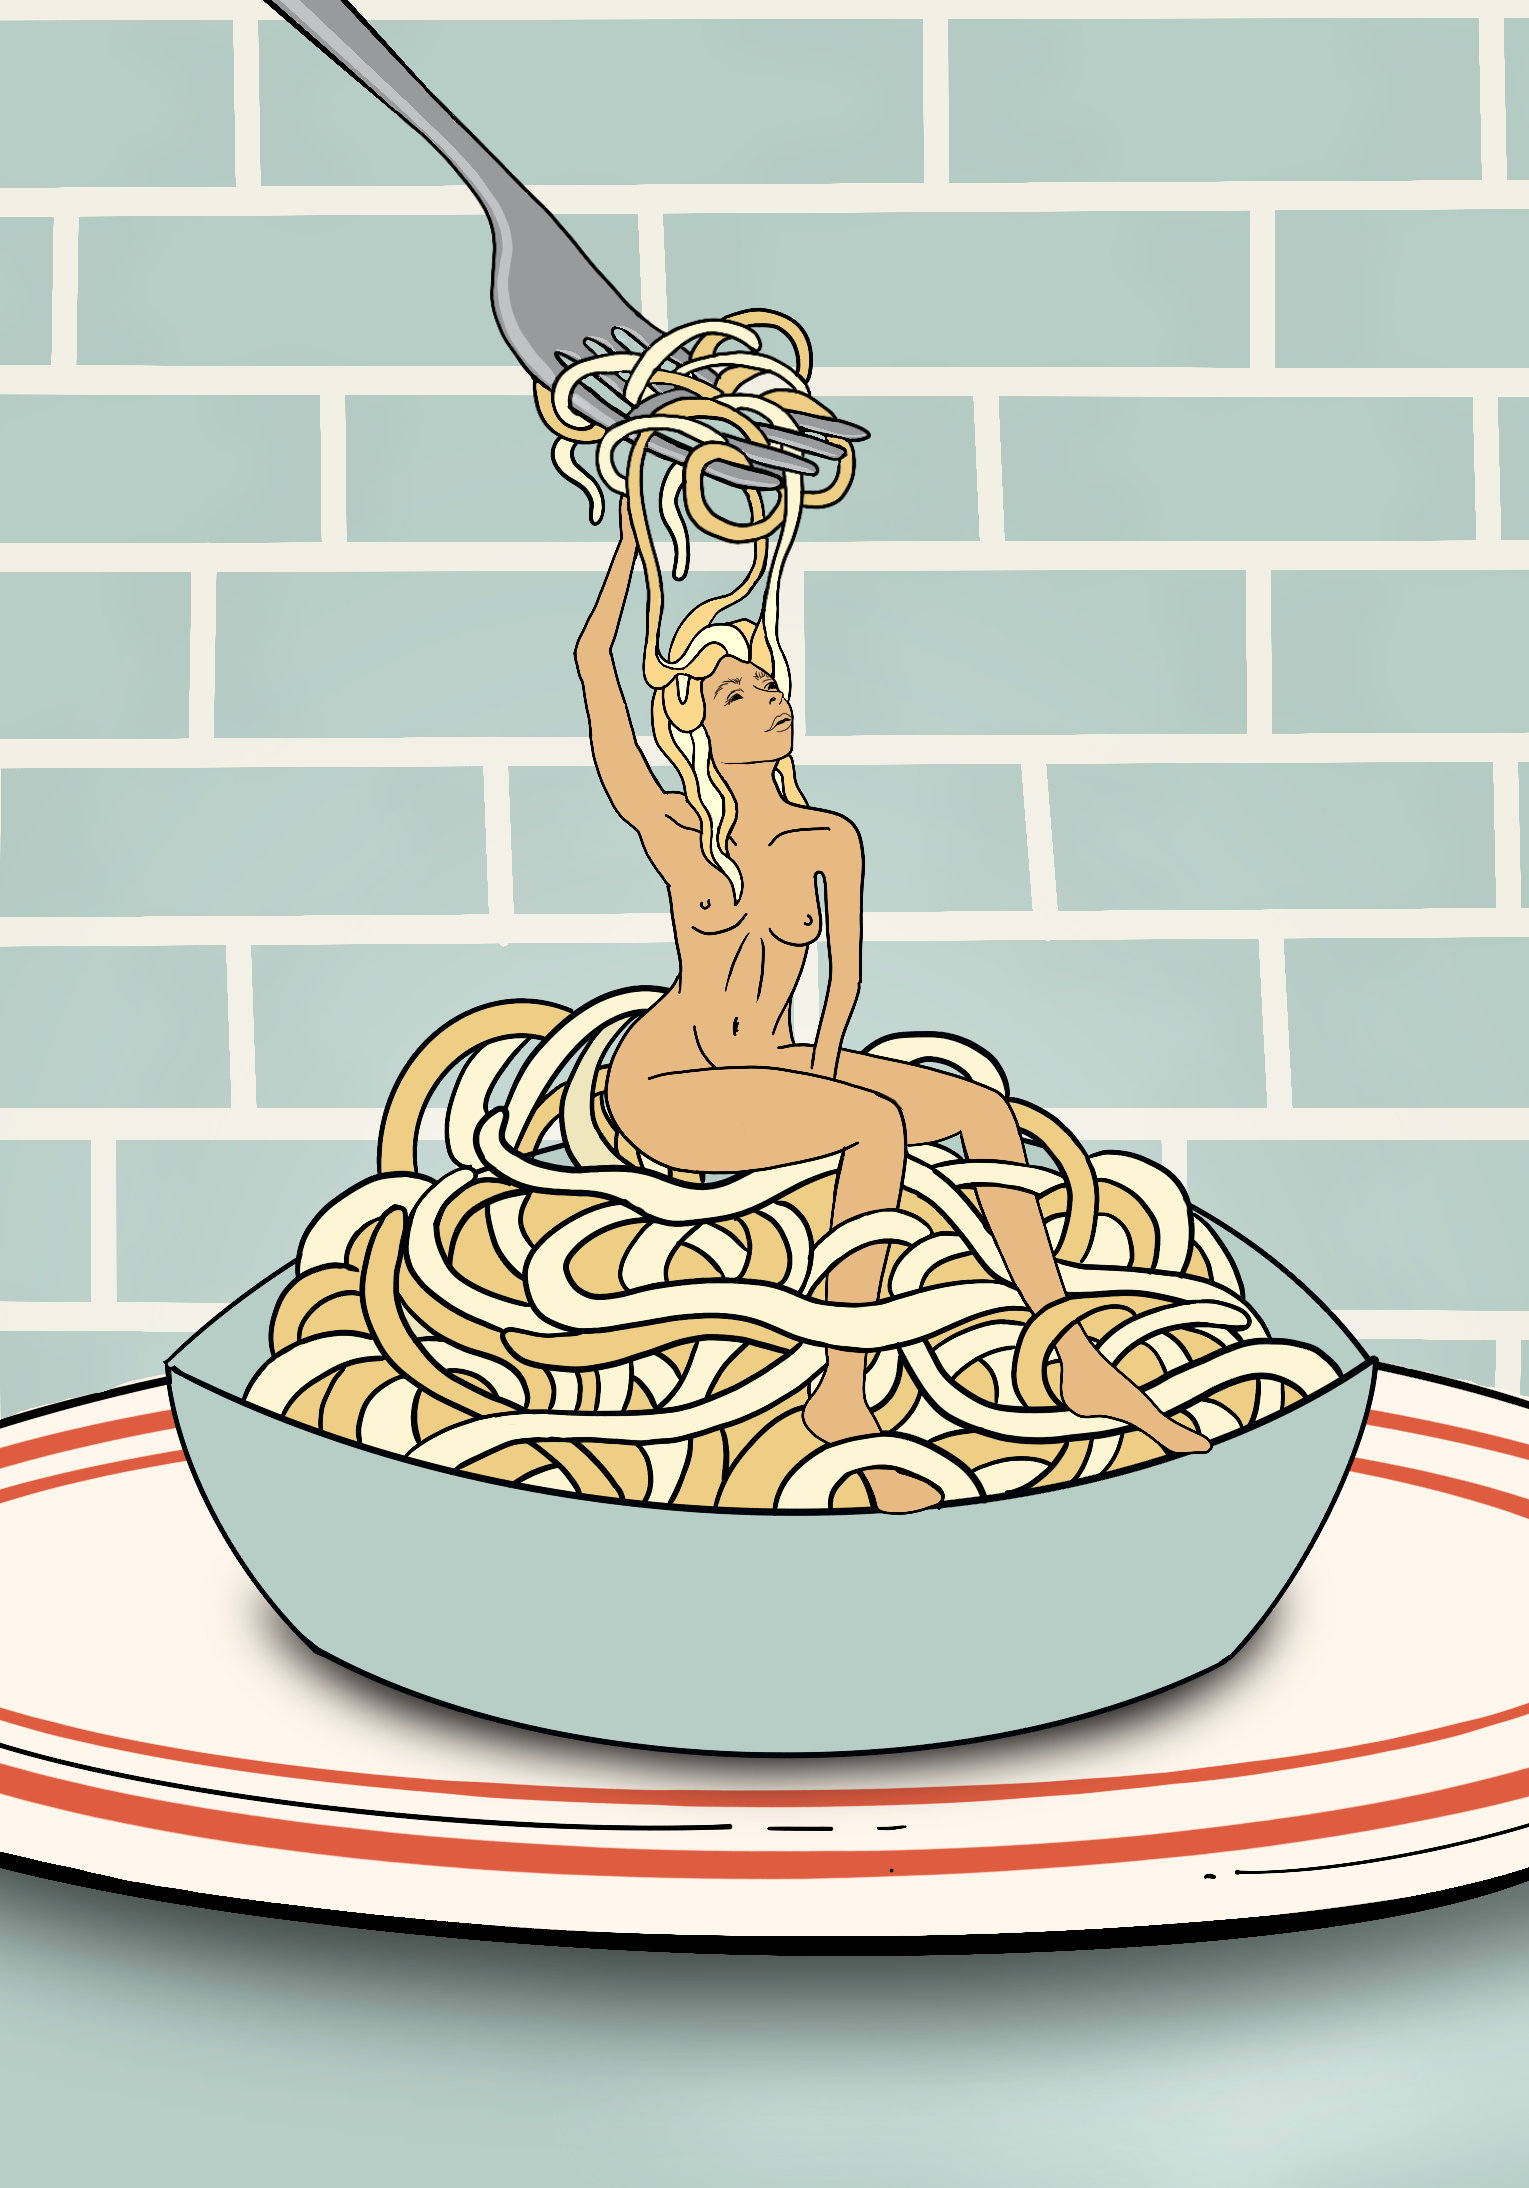 Nude in the Noodles